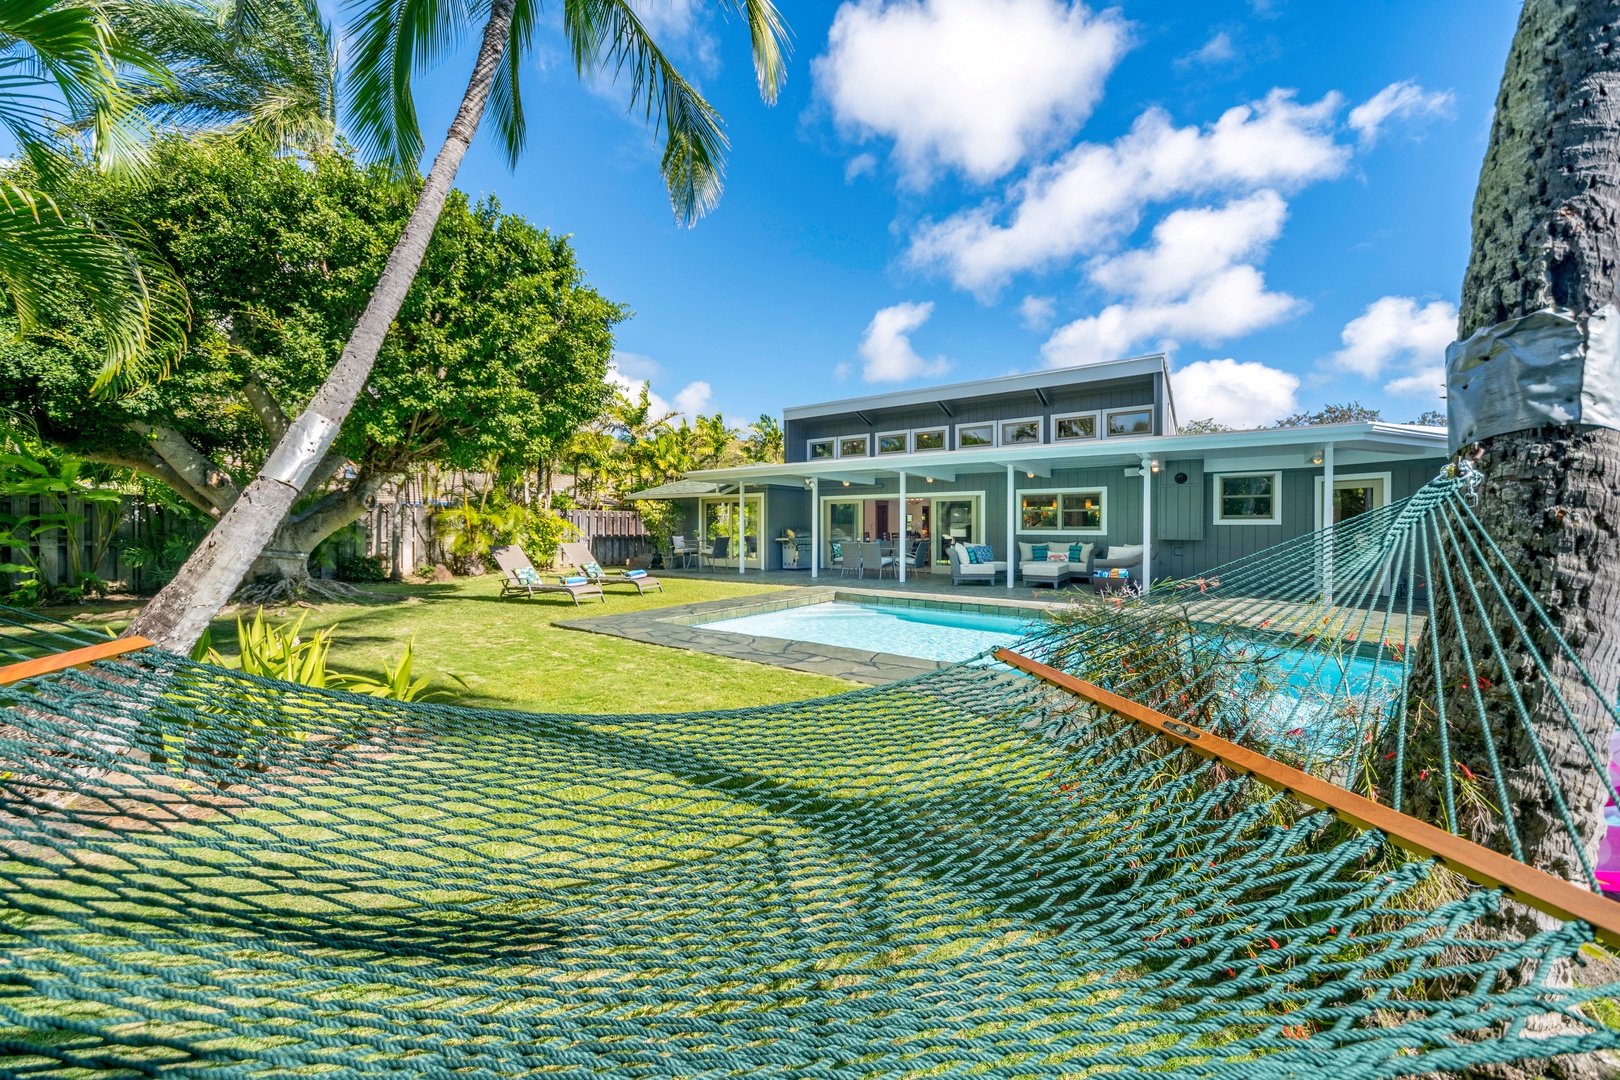 Honolulu Vacation Rentals, Hale Niuiki - Grab your favorite book and take it in on the hammock!